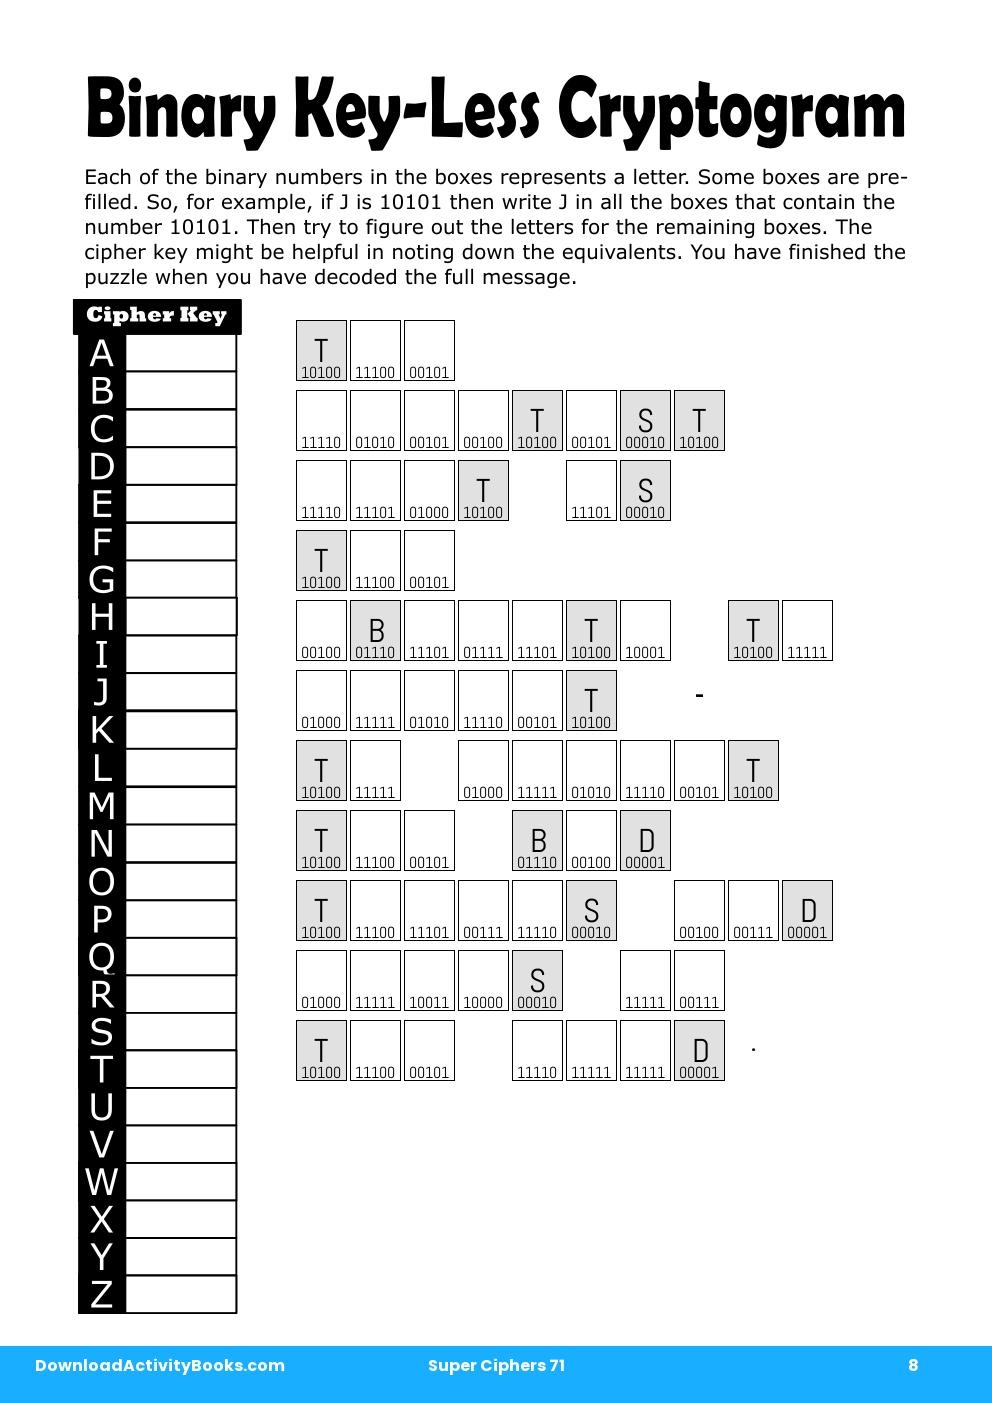 Binary Key-Less Cryptogram in Super Ciphers 71